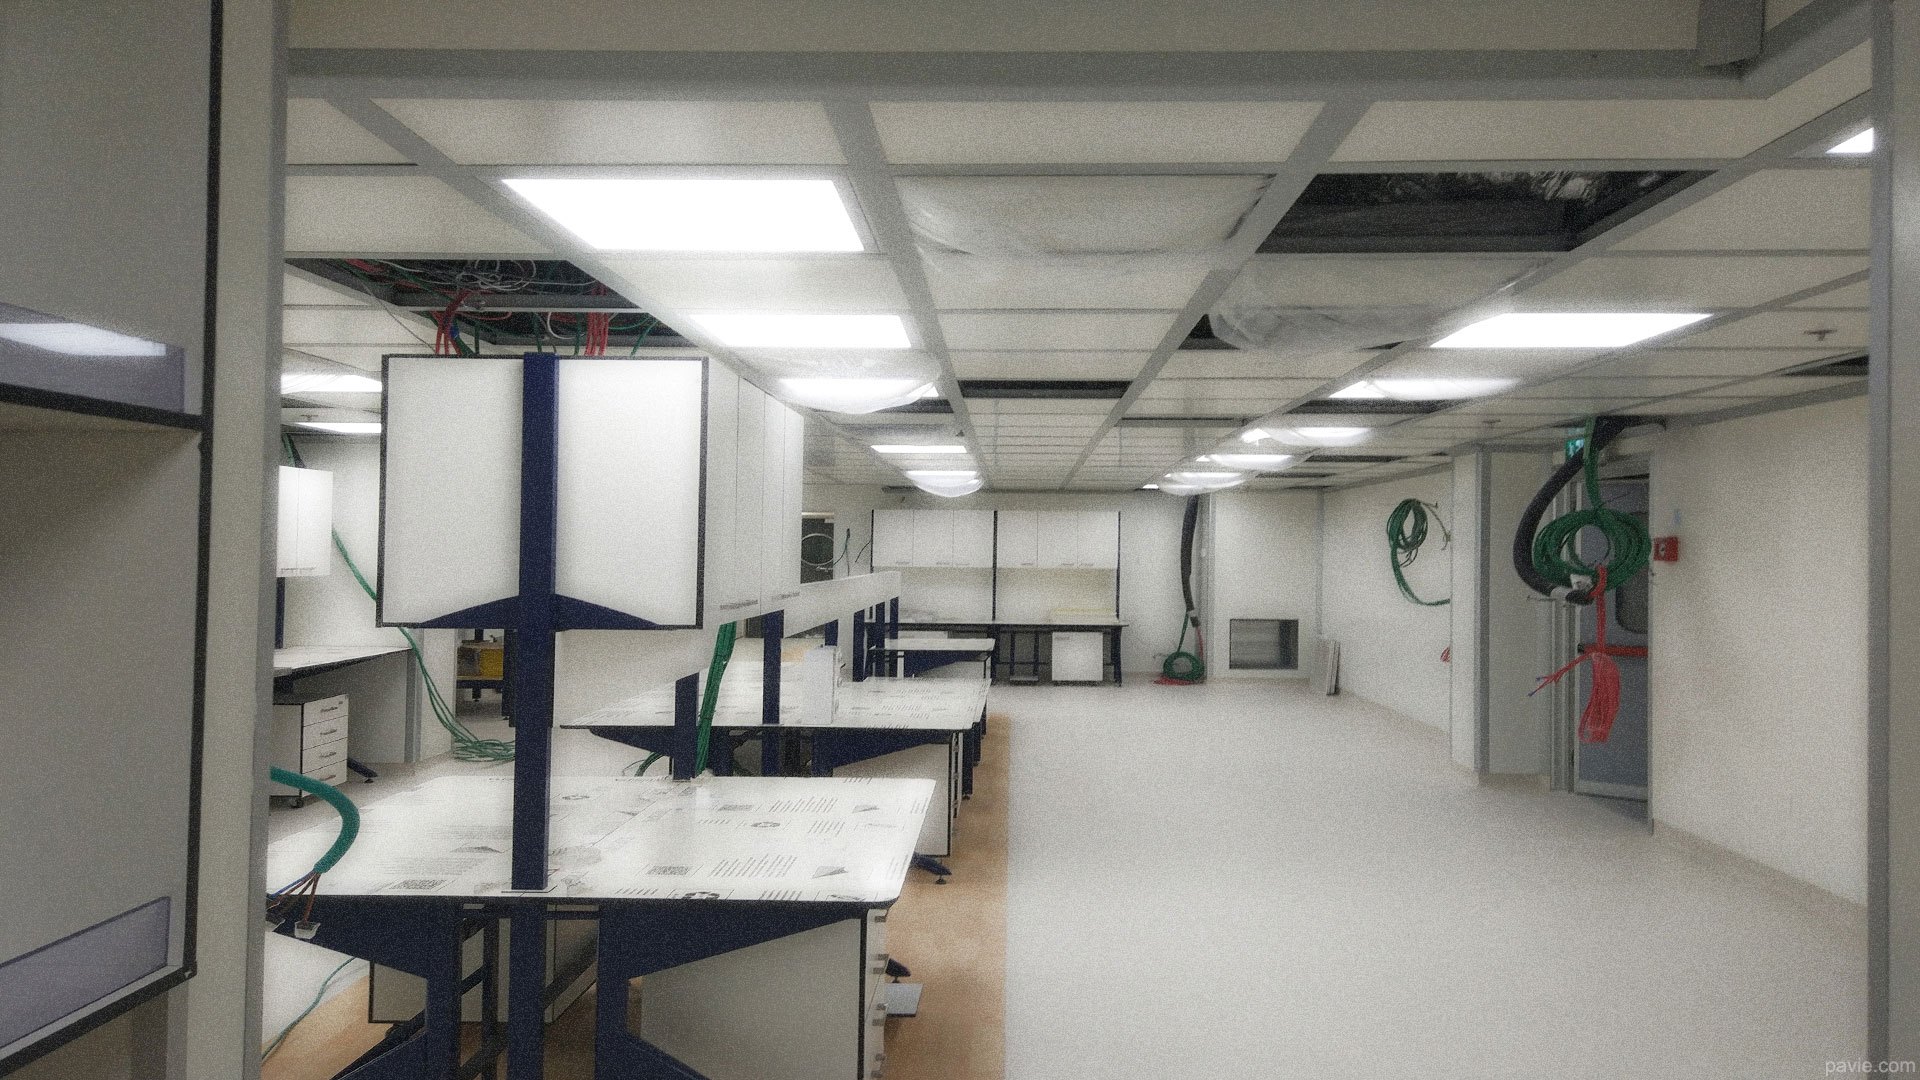 Pavie laboratories, clean rooms and projects with a high security classification